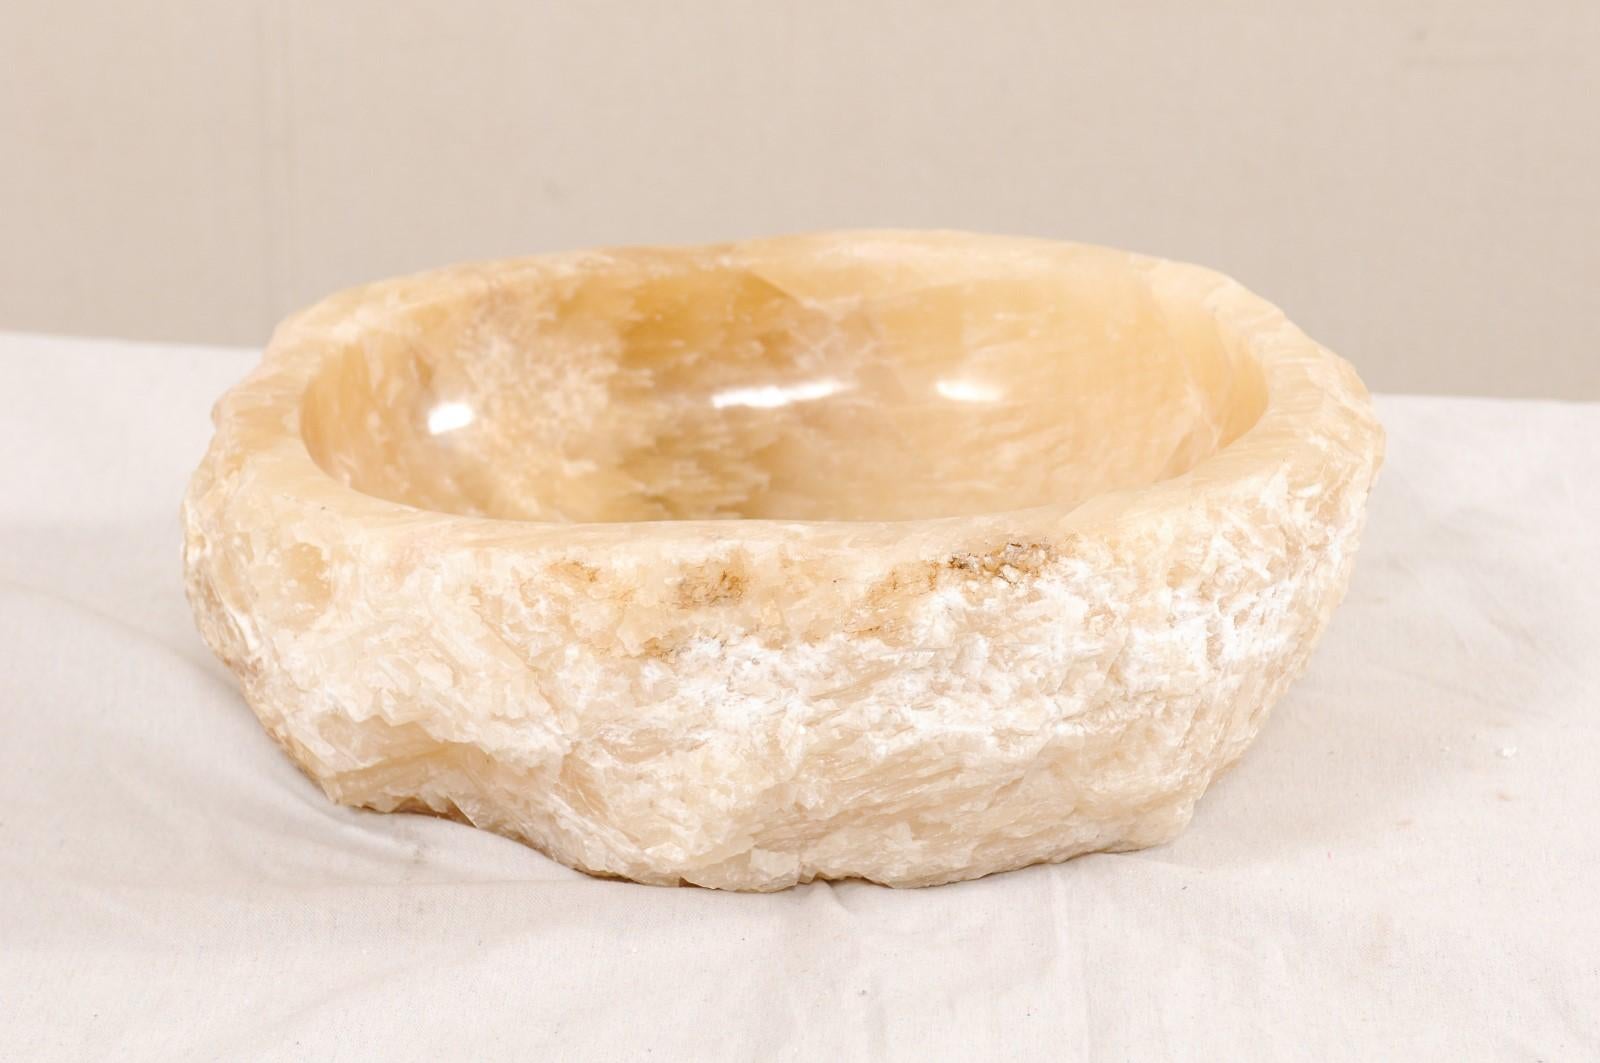 Carved Onyx Rock Sink Basin in Cream Color 4